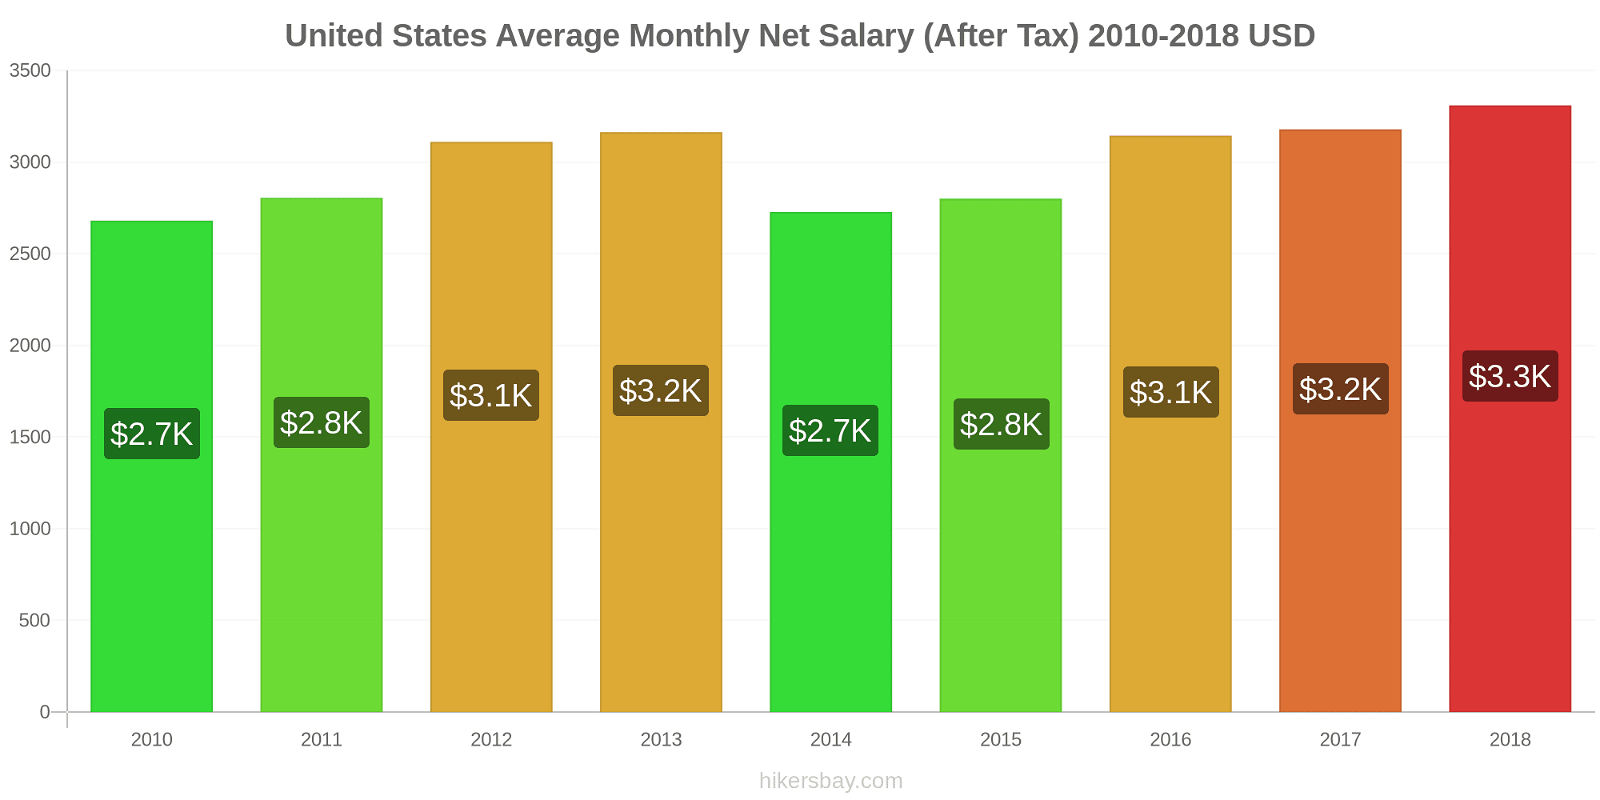 United States price changes Average Monthly Net Salary (After Tax) hikersbay.com